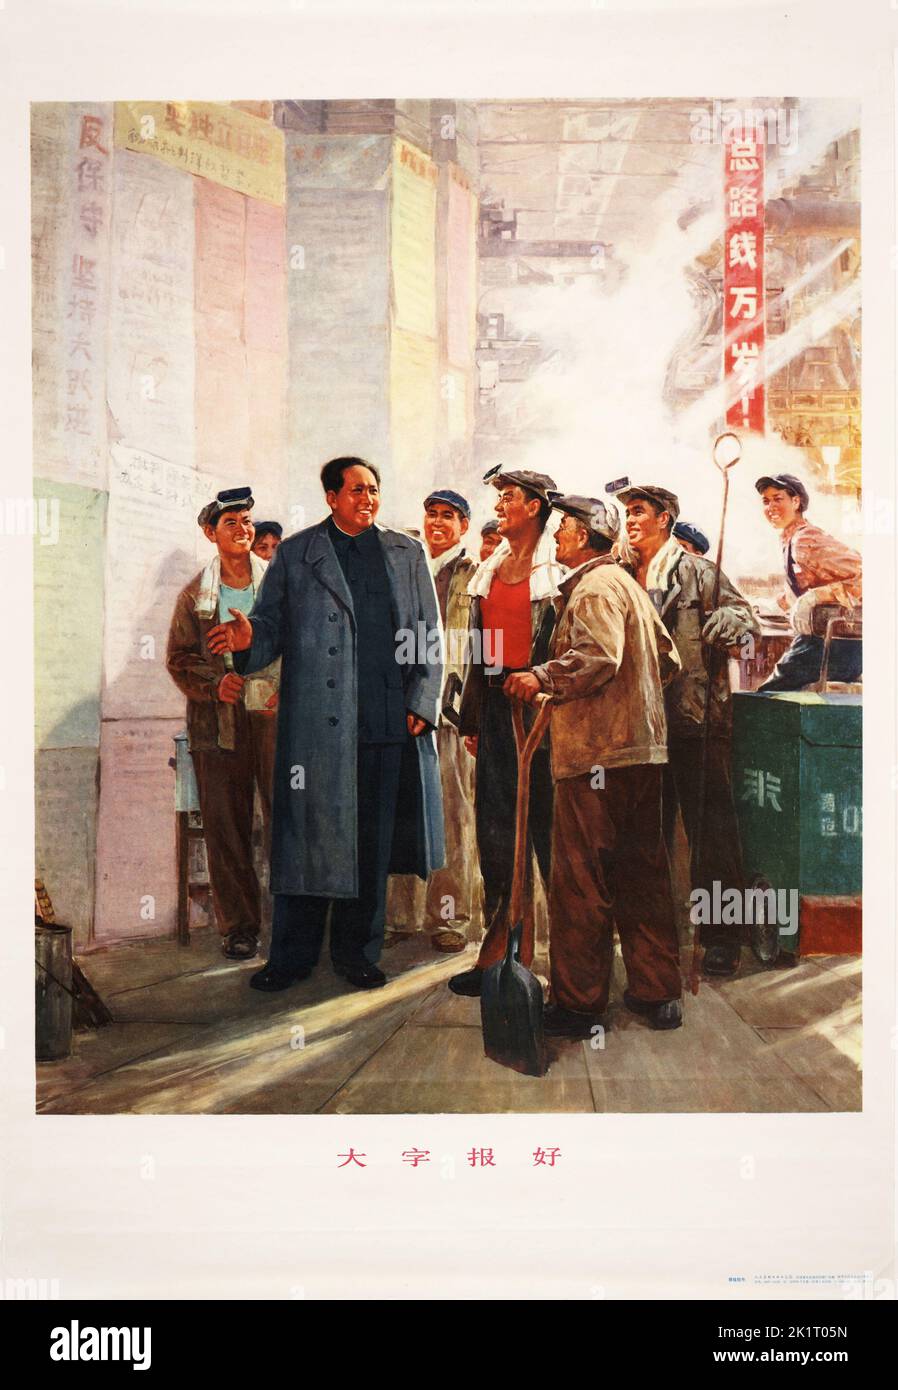 Big-character posters are good. Museum: PRIVATE COLLECTION. Author: Fu Zhigui. Stock Photo